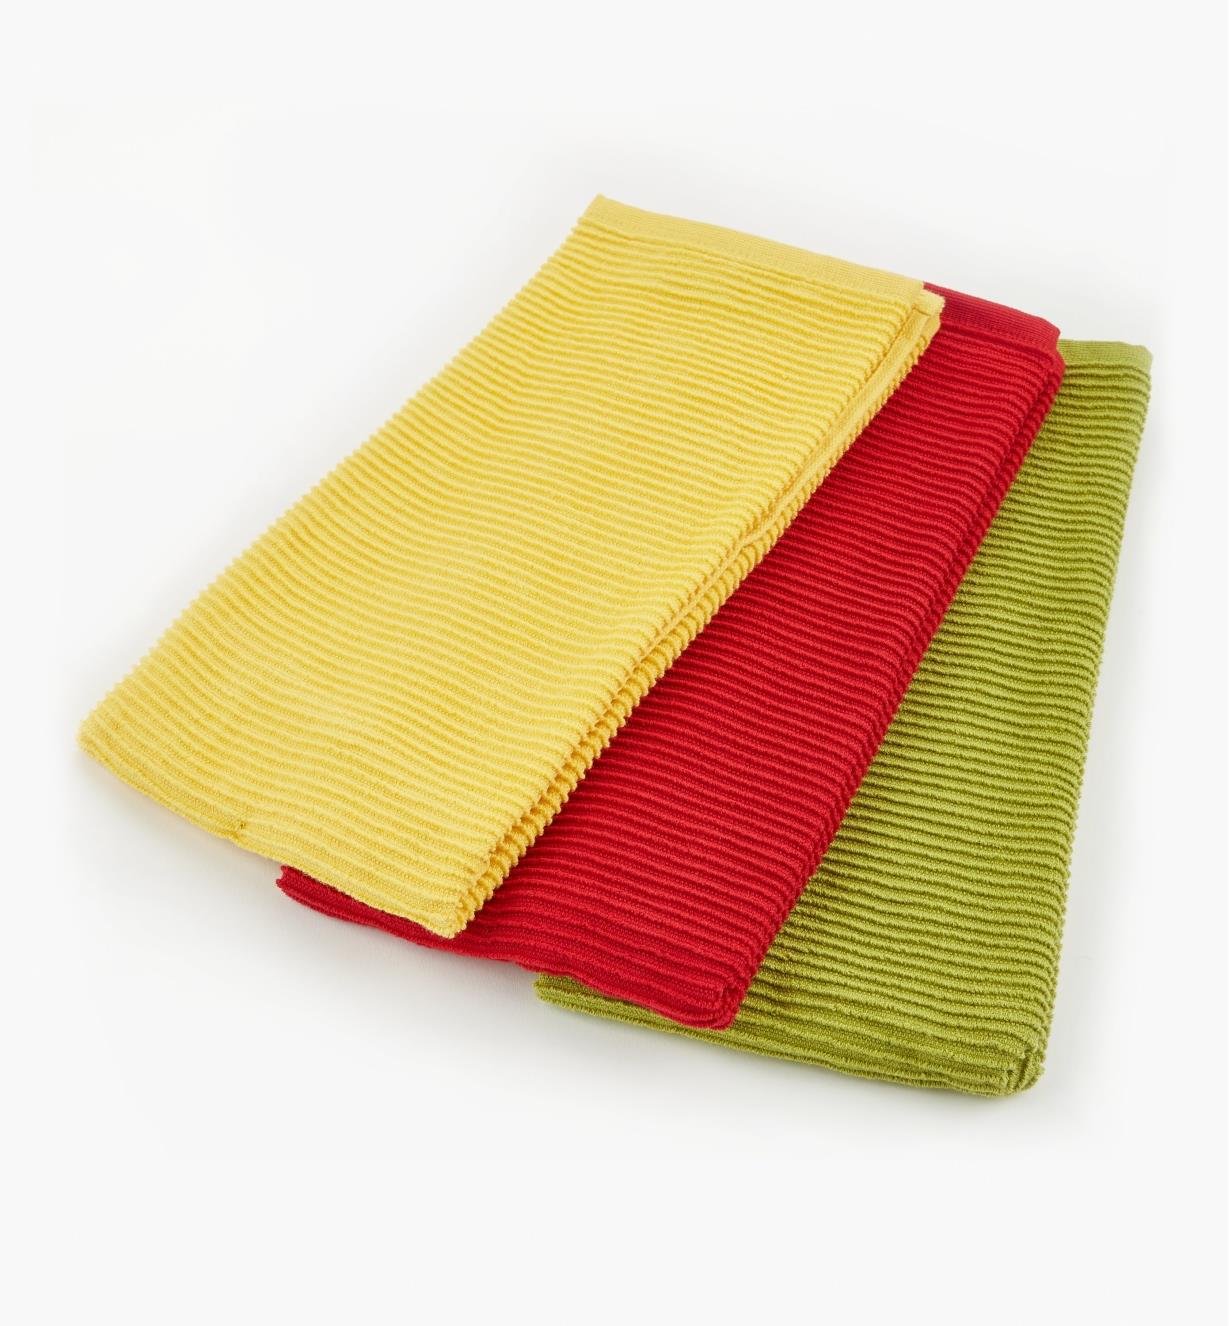 88K5857 - Set of 3 Ripple Towels (yellow, red, green)